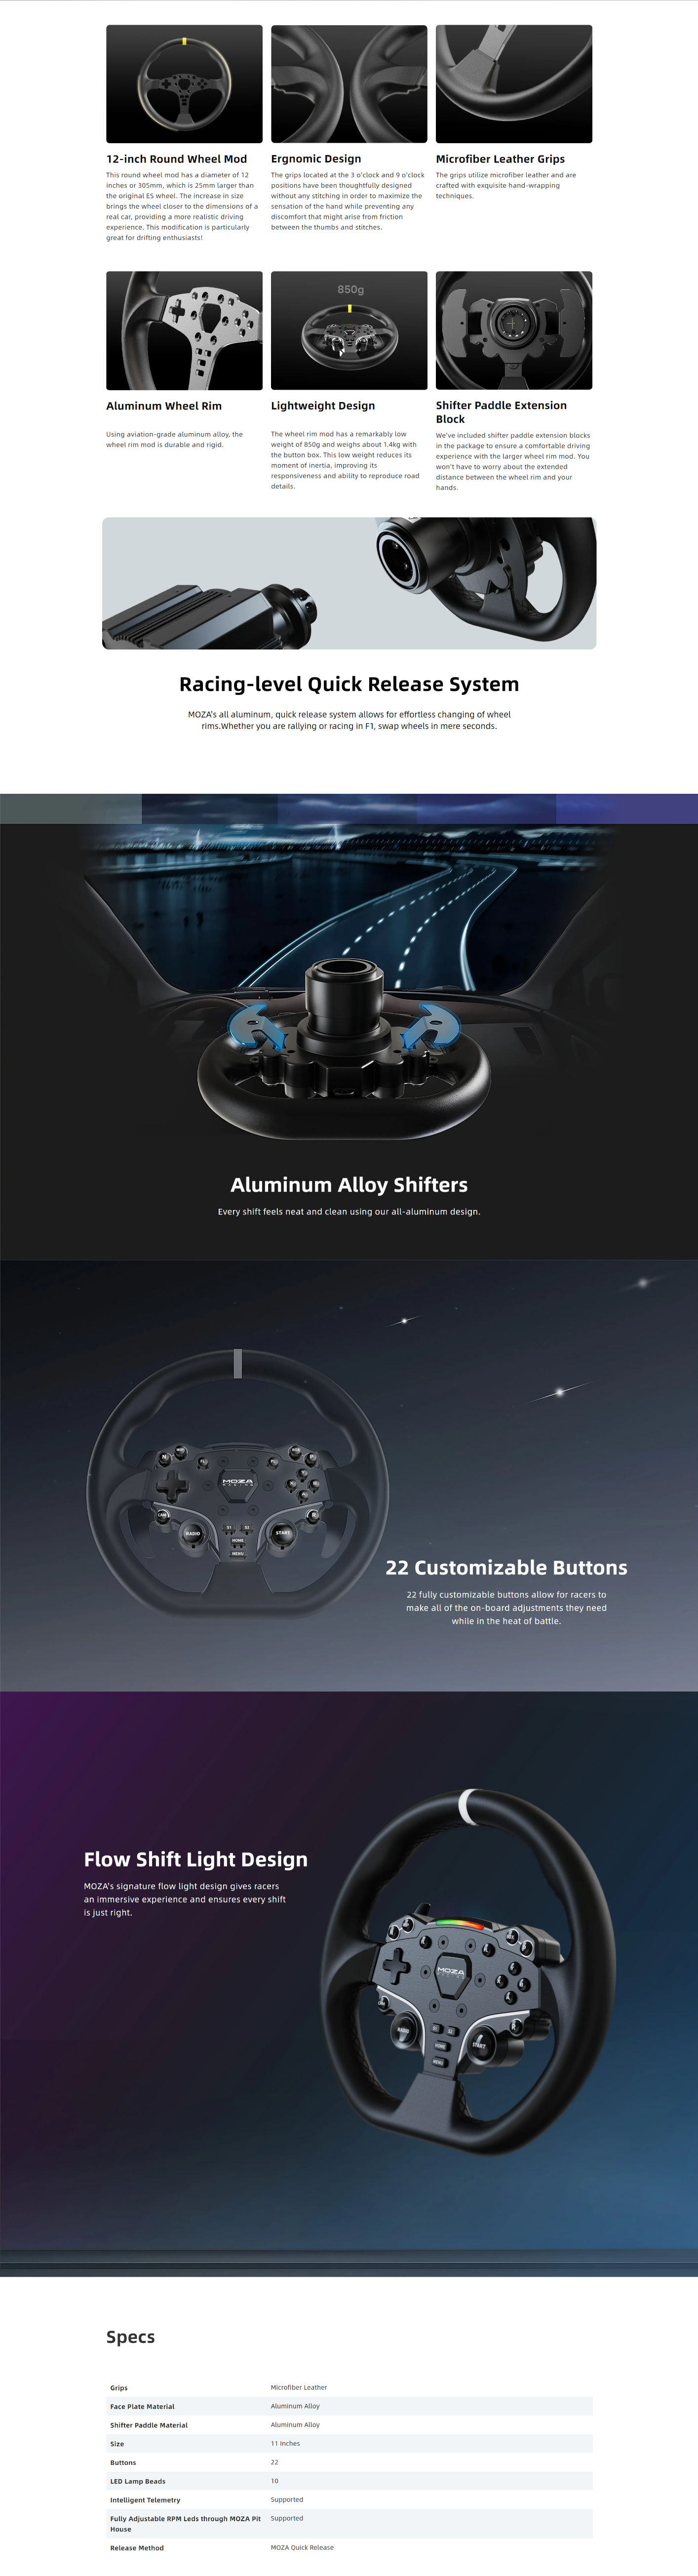 A large marketing image providing additional information about the product MOZA ES Steering Wheel - Additional alt info not provided